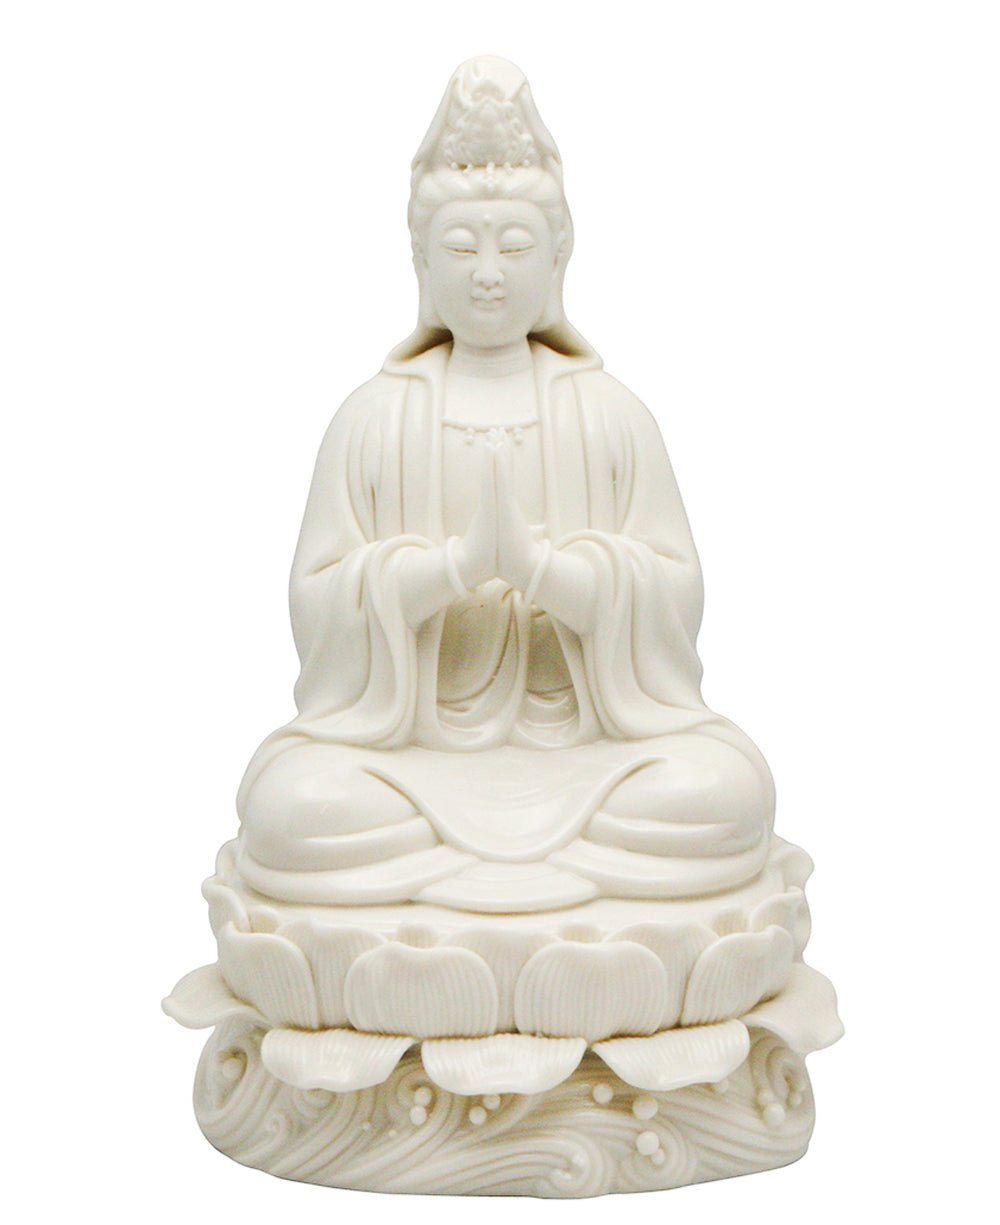 White Porcelain Praying Kuan Yin Statue, 10 Inches - Sculptures & Statues